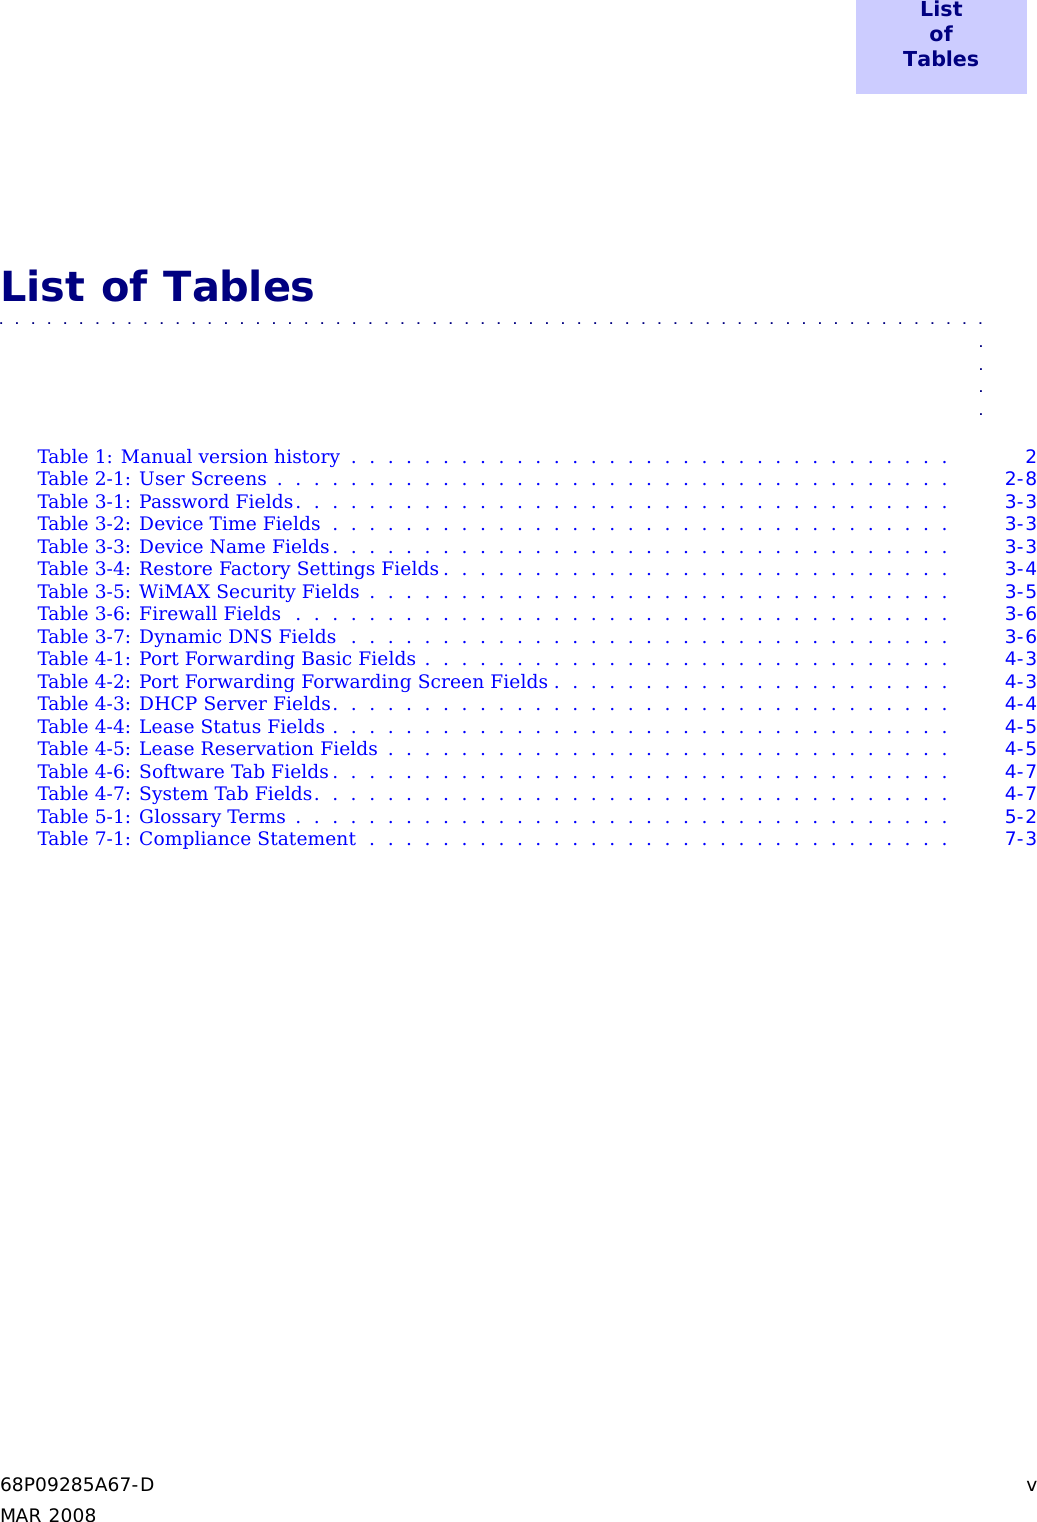 ListofTablesList of Tables■■■■■■■■■■ ■■■■■■■■■■■■■ ■■■■■■■■■■■■■ ■■■■■■■■■■■■■ ■■■■■■■■■■■■■■■■■Table1:Manualversionhistory................................. 2Table2-1:UserScreens..................................... 2-8Table3-1:PasswordFields.................................... 3-3Table3-2:DeviceTimeFields.................................. 3-3Table3-3:DeviceNameFields.................................. 3-3Table3-4:RestoreFactorySettingsFields............................ 3-4Table3-5:WiMAXSecurityFields................................ 3-5Table3-6:FirewallFields.................................... 3-6Table3-7:DynamicDNSFields................................. 3-6Table4-1:PortForwardingBasicFields............................. 4-3Table4-2:PortForwardingForwardingScreenFields...................... 4-3Table4-3:DHCPServerFields.................................. 4-4Table4-4:LeaseStatusFields.................................. 4-5Table4-5:LeaseReservationFields............................... 4-5Table4-6:SoftwareTabFields.................................. 4-7Table4-7:SystemTabFields................................... 4-7Table5-1:GlossaryTerms.................................... 5-2Table7-1:ComplianceStatement................................ 7-368P09285A67-D vMAR 2008